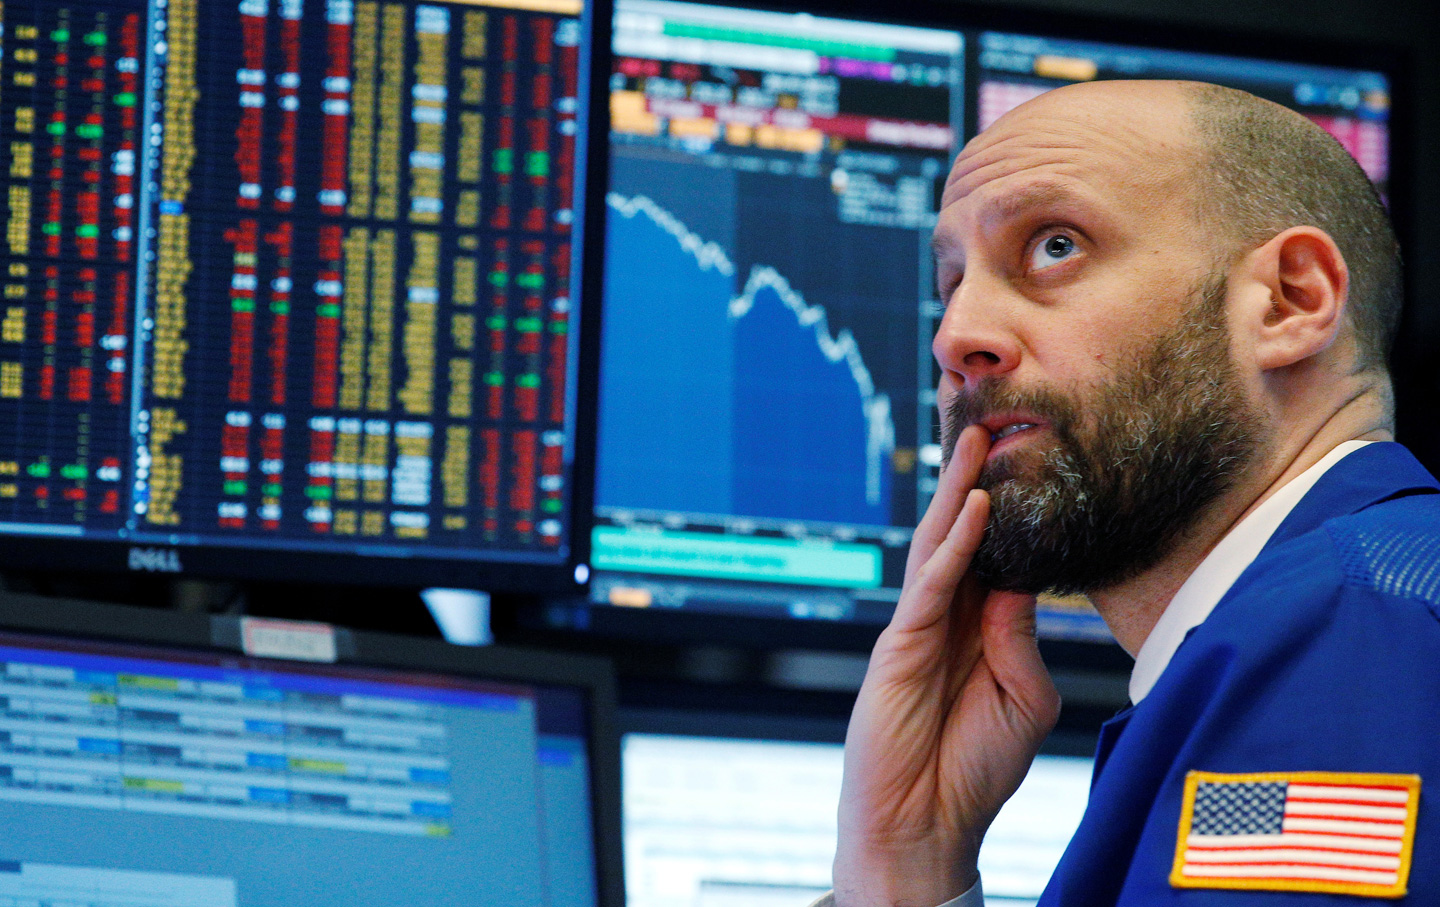 People Are Panicking About the Stock Market—but It Doesn’t Have to Be This Way